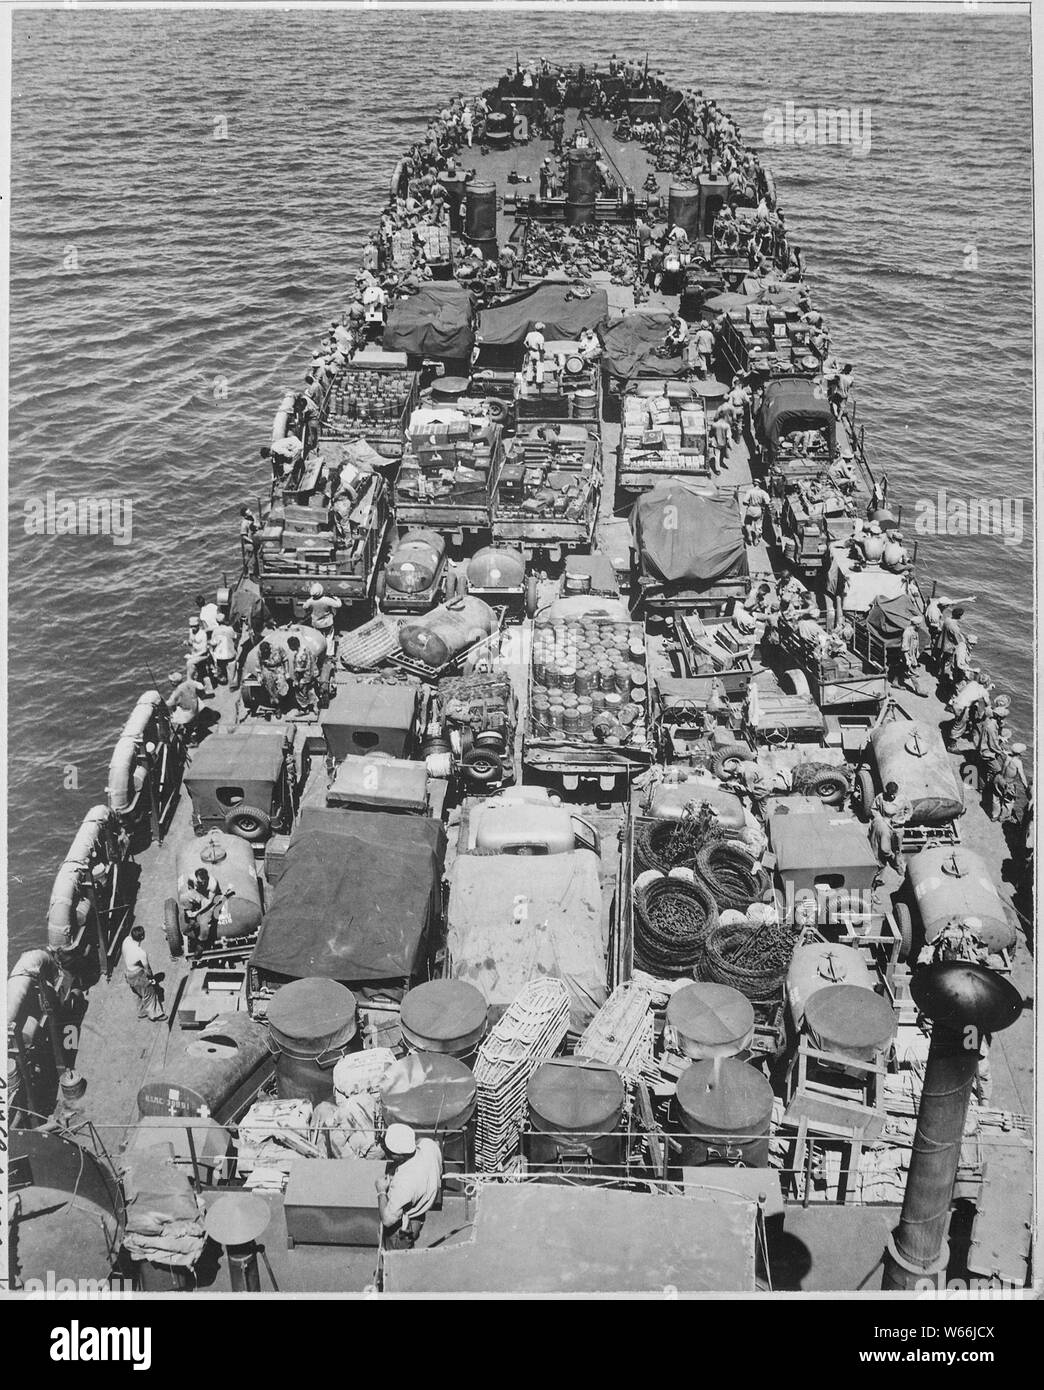 Invasion of Cape Gloucester, New Britain, 24 December 1943. Crammed with men and material for the invasion, this Coast Guard-manned LST nears the Japanese held shore. Troops shown in the picture are Marines.; General notes:  Use War and Conflict Number 855 when ordering a reproduction or requesting information about this image. Stock Photo